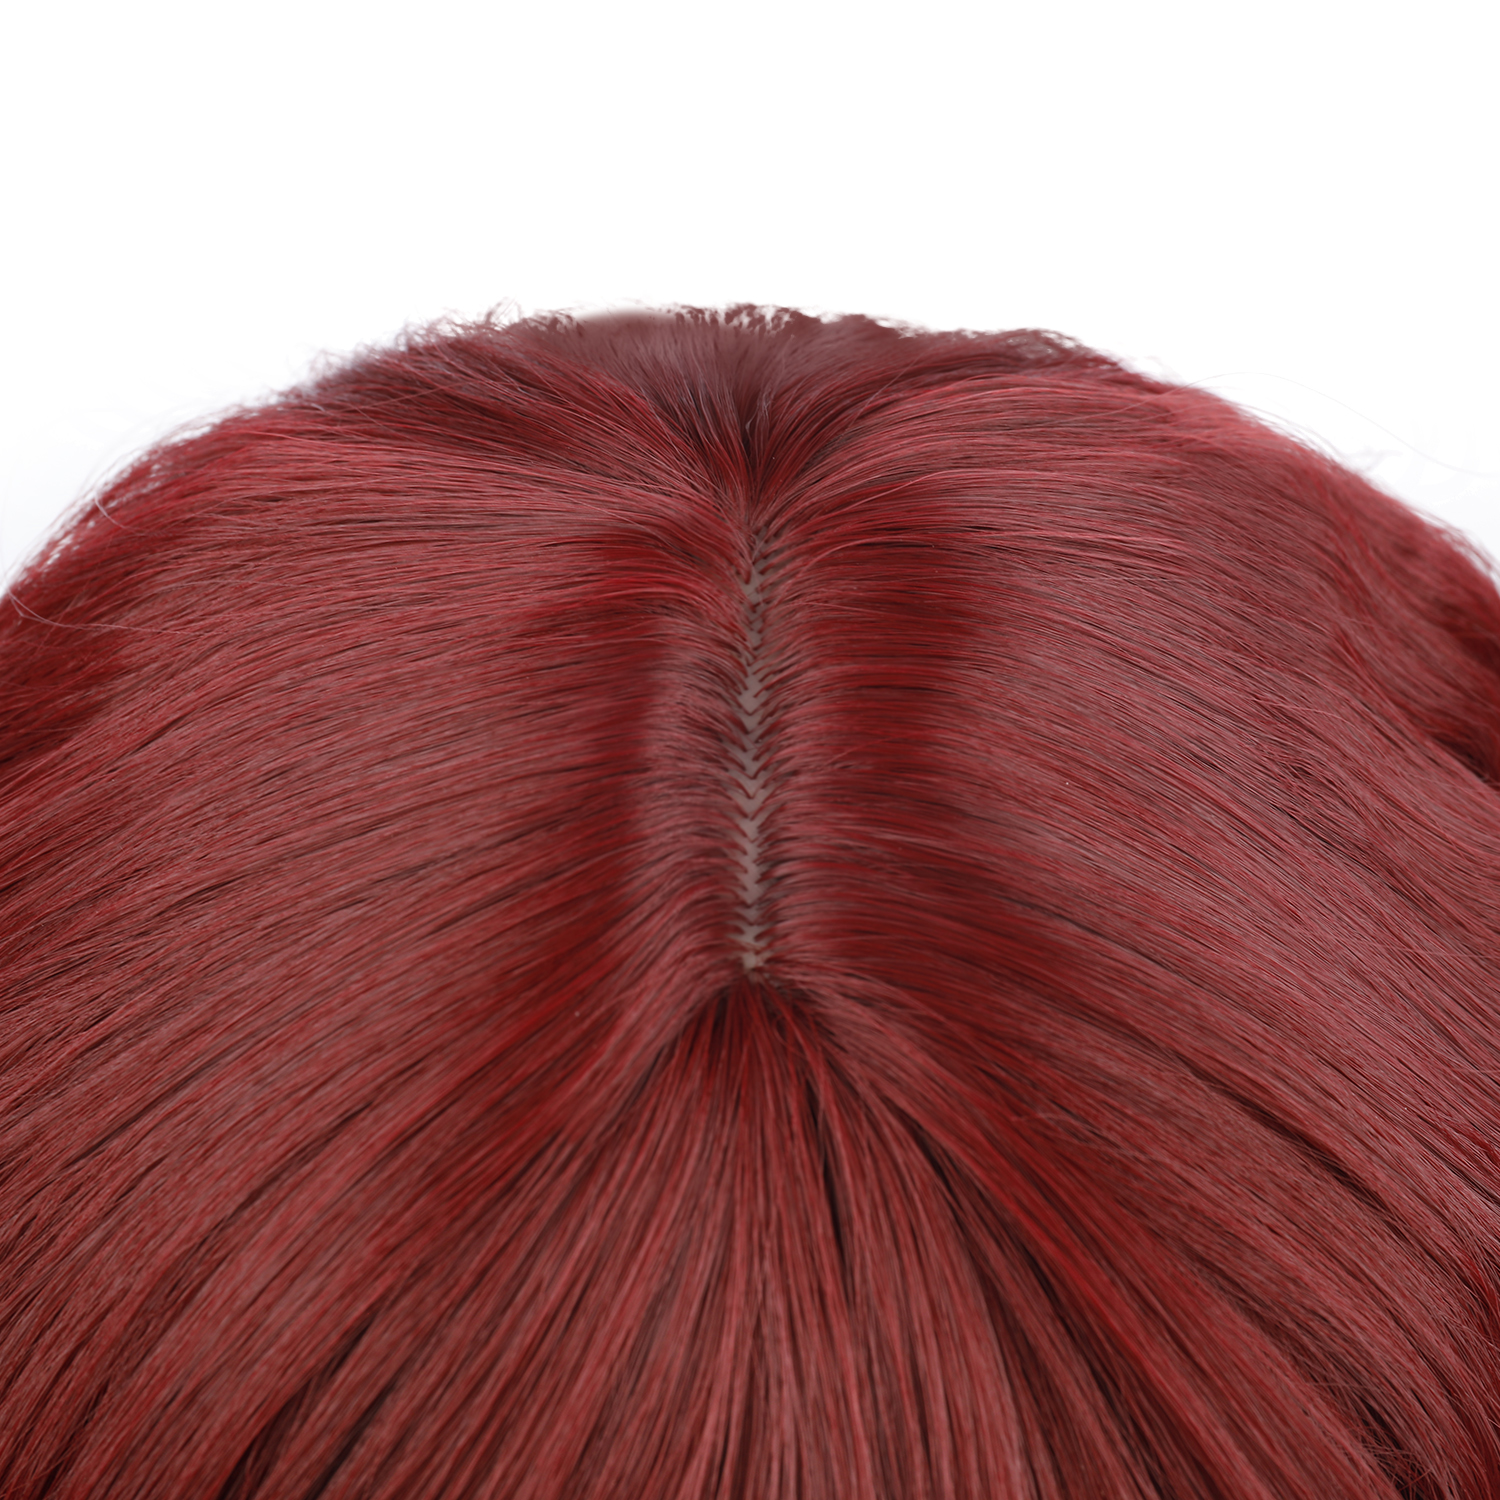 RightOn Red Wig Short Curly Wavy Wig Red Wig with Bangs Wine Red Wig ...